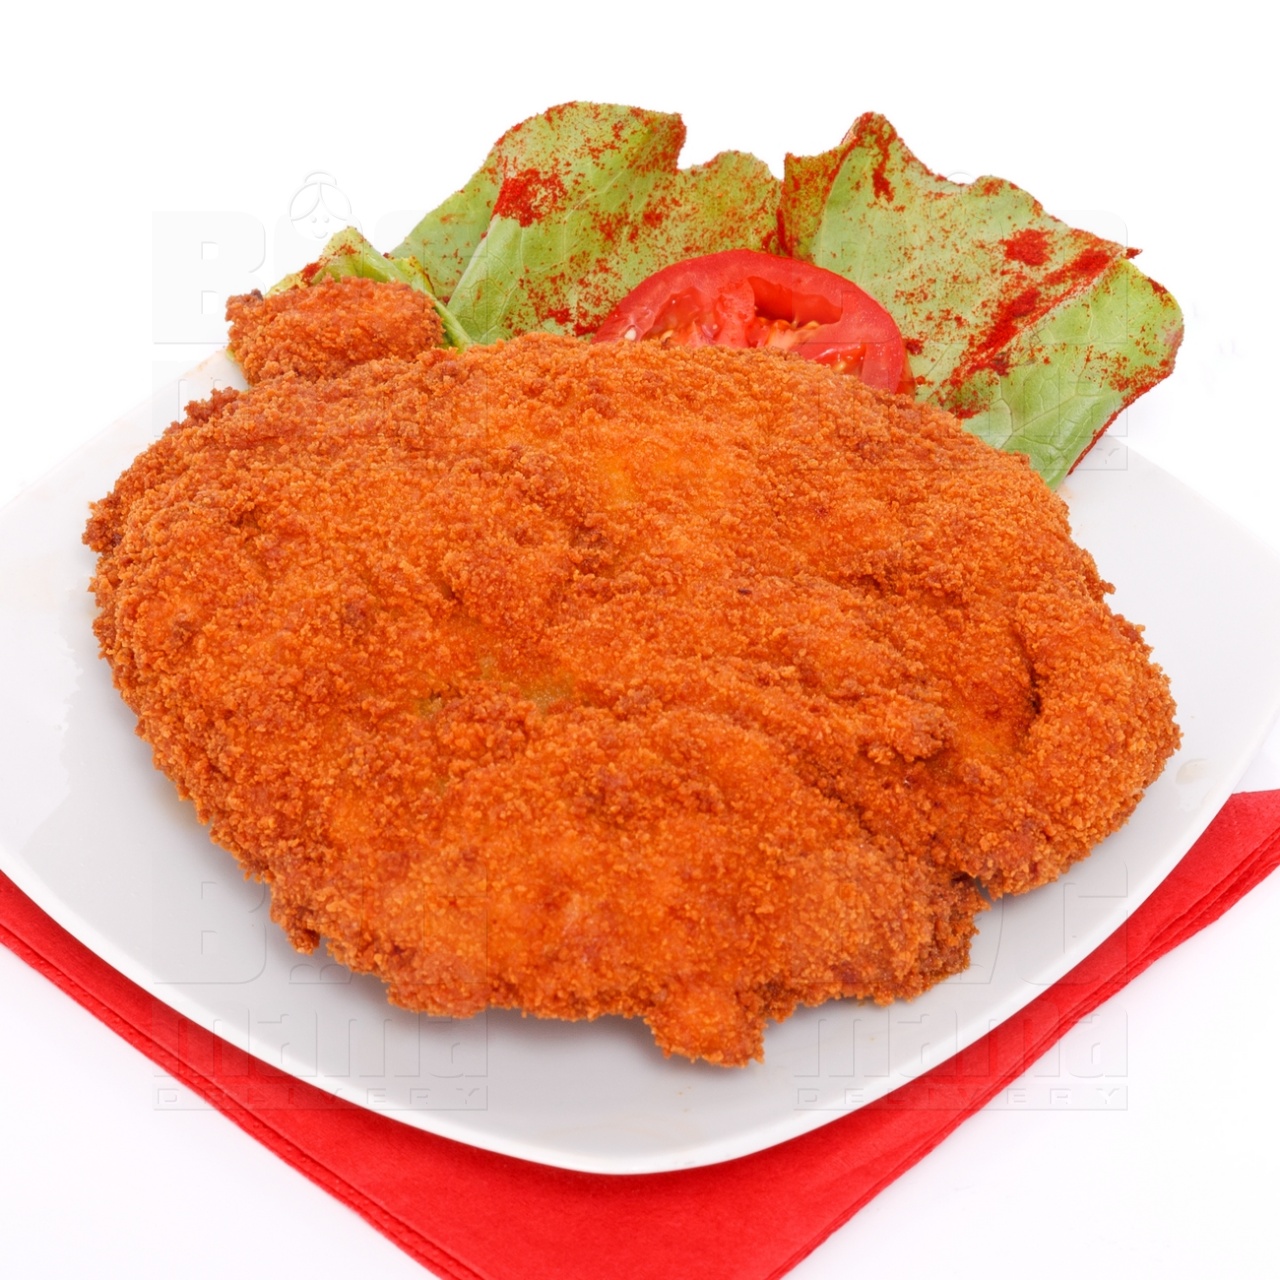 Product #16 image - Breaded pork meat